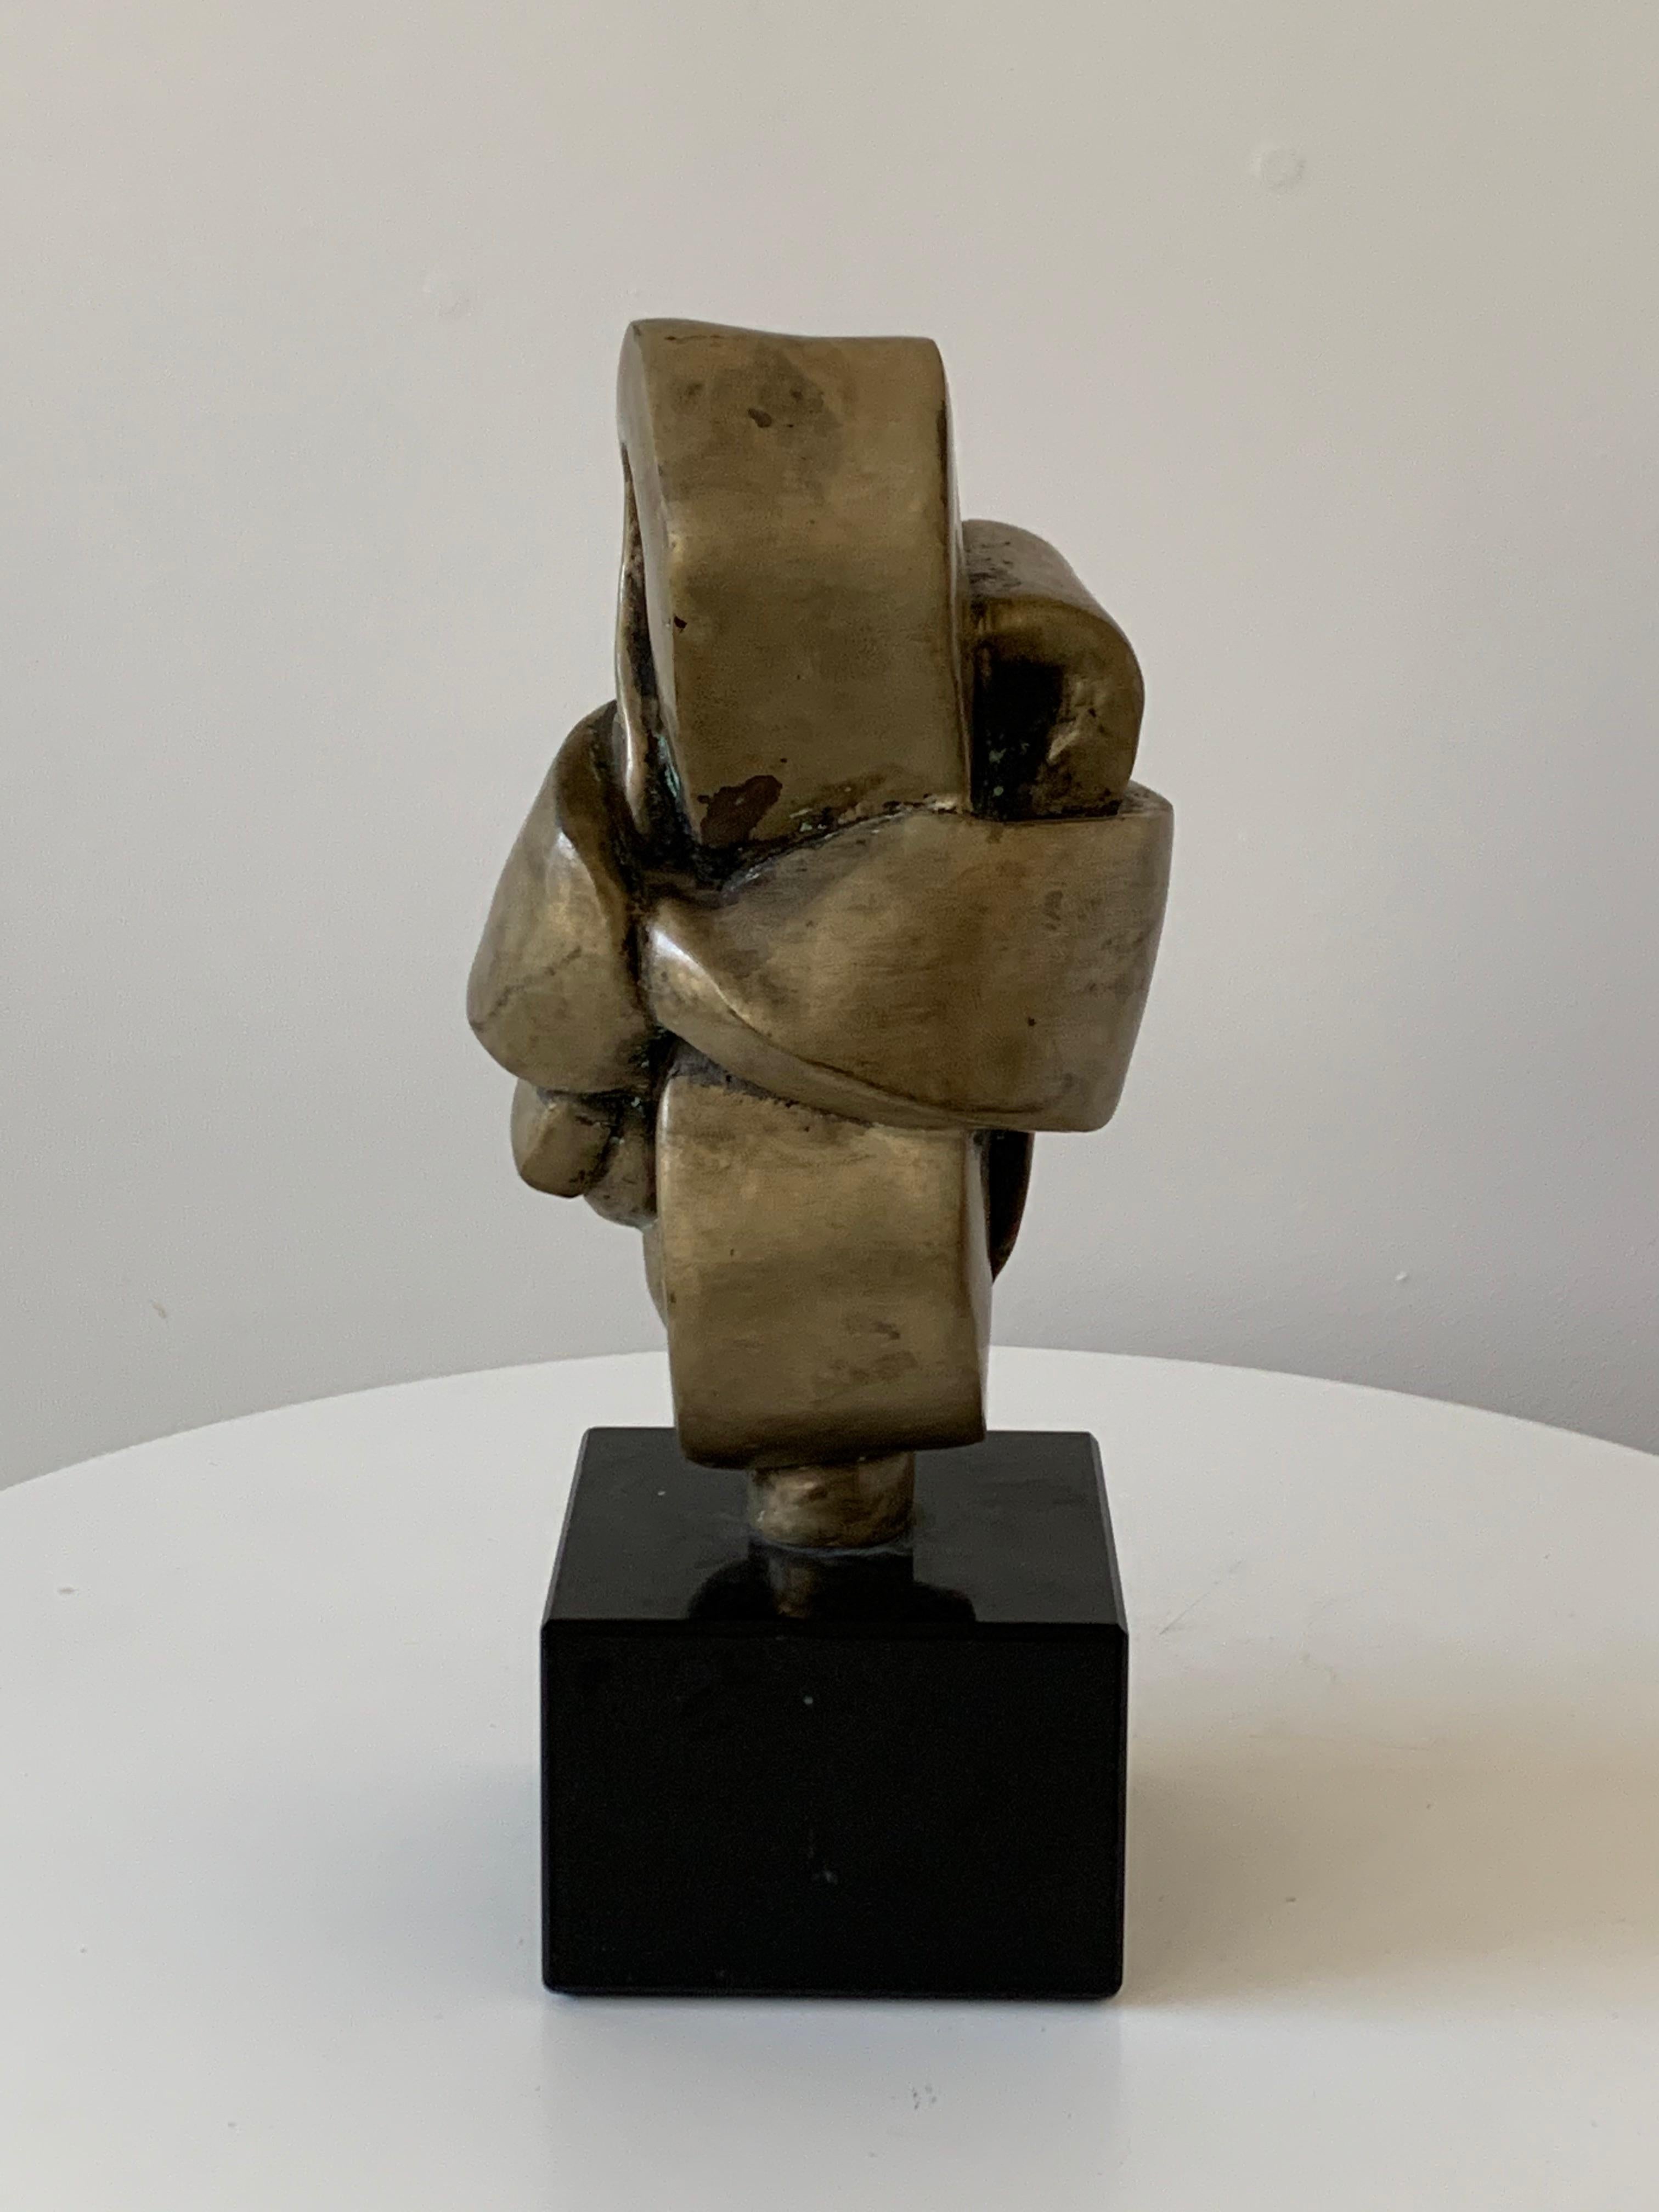 Tabletop bronze sculpture on a black marble base.
Abstract folded knot. Good from all sides. Minor imperfections on surface are not losses, but original.
Mounted on original base (2.5 x 3.5 x 3.25)
Unsigned.
Provenance Allan Stone Gallery, NYC.